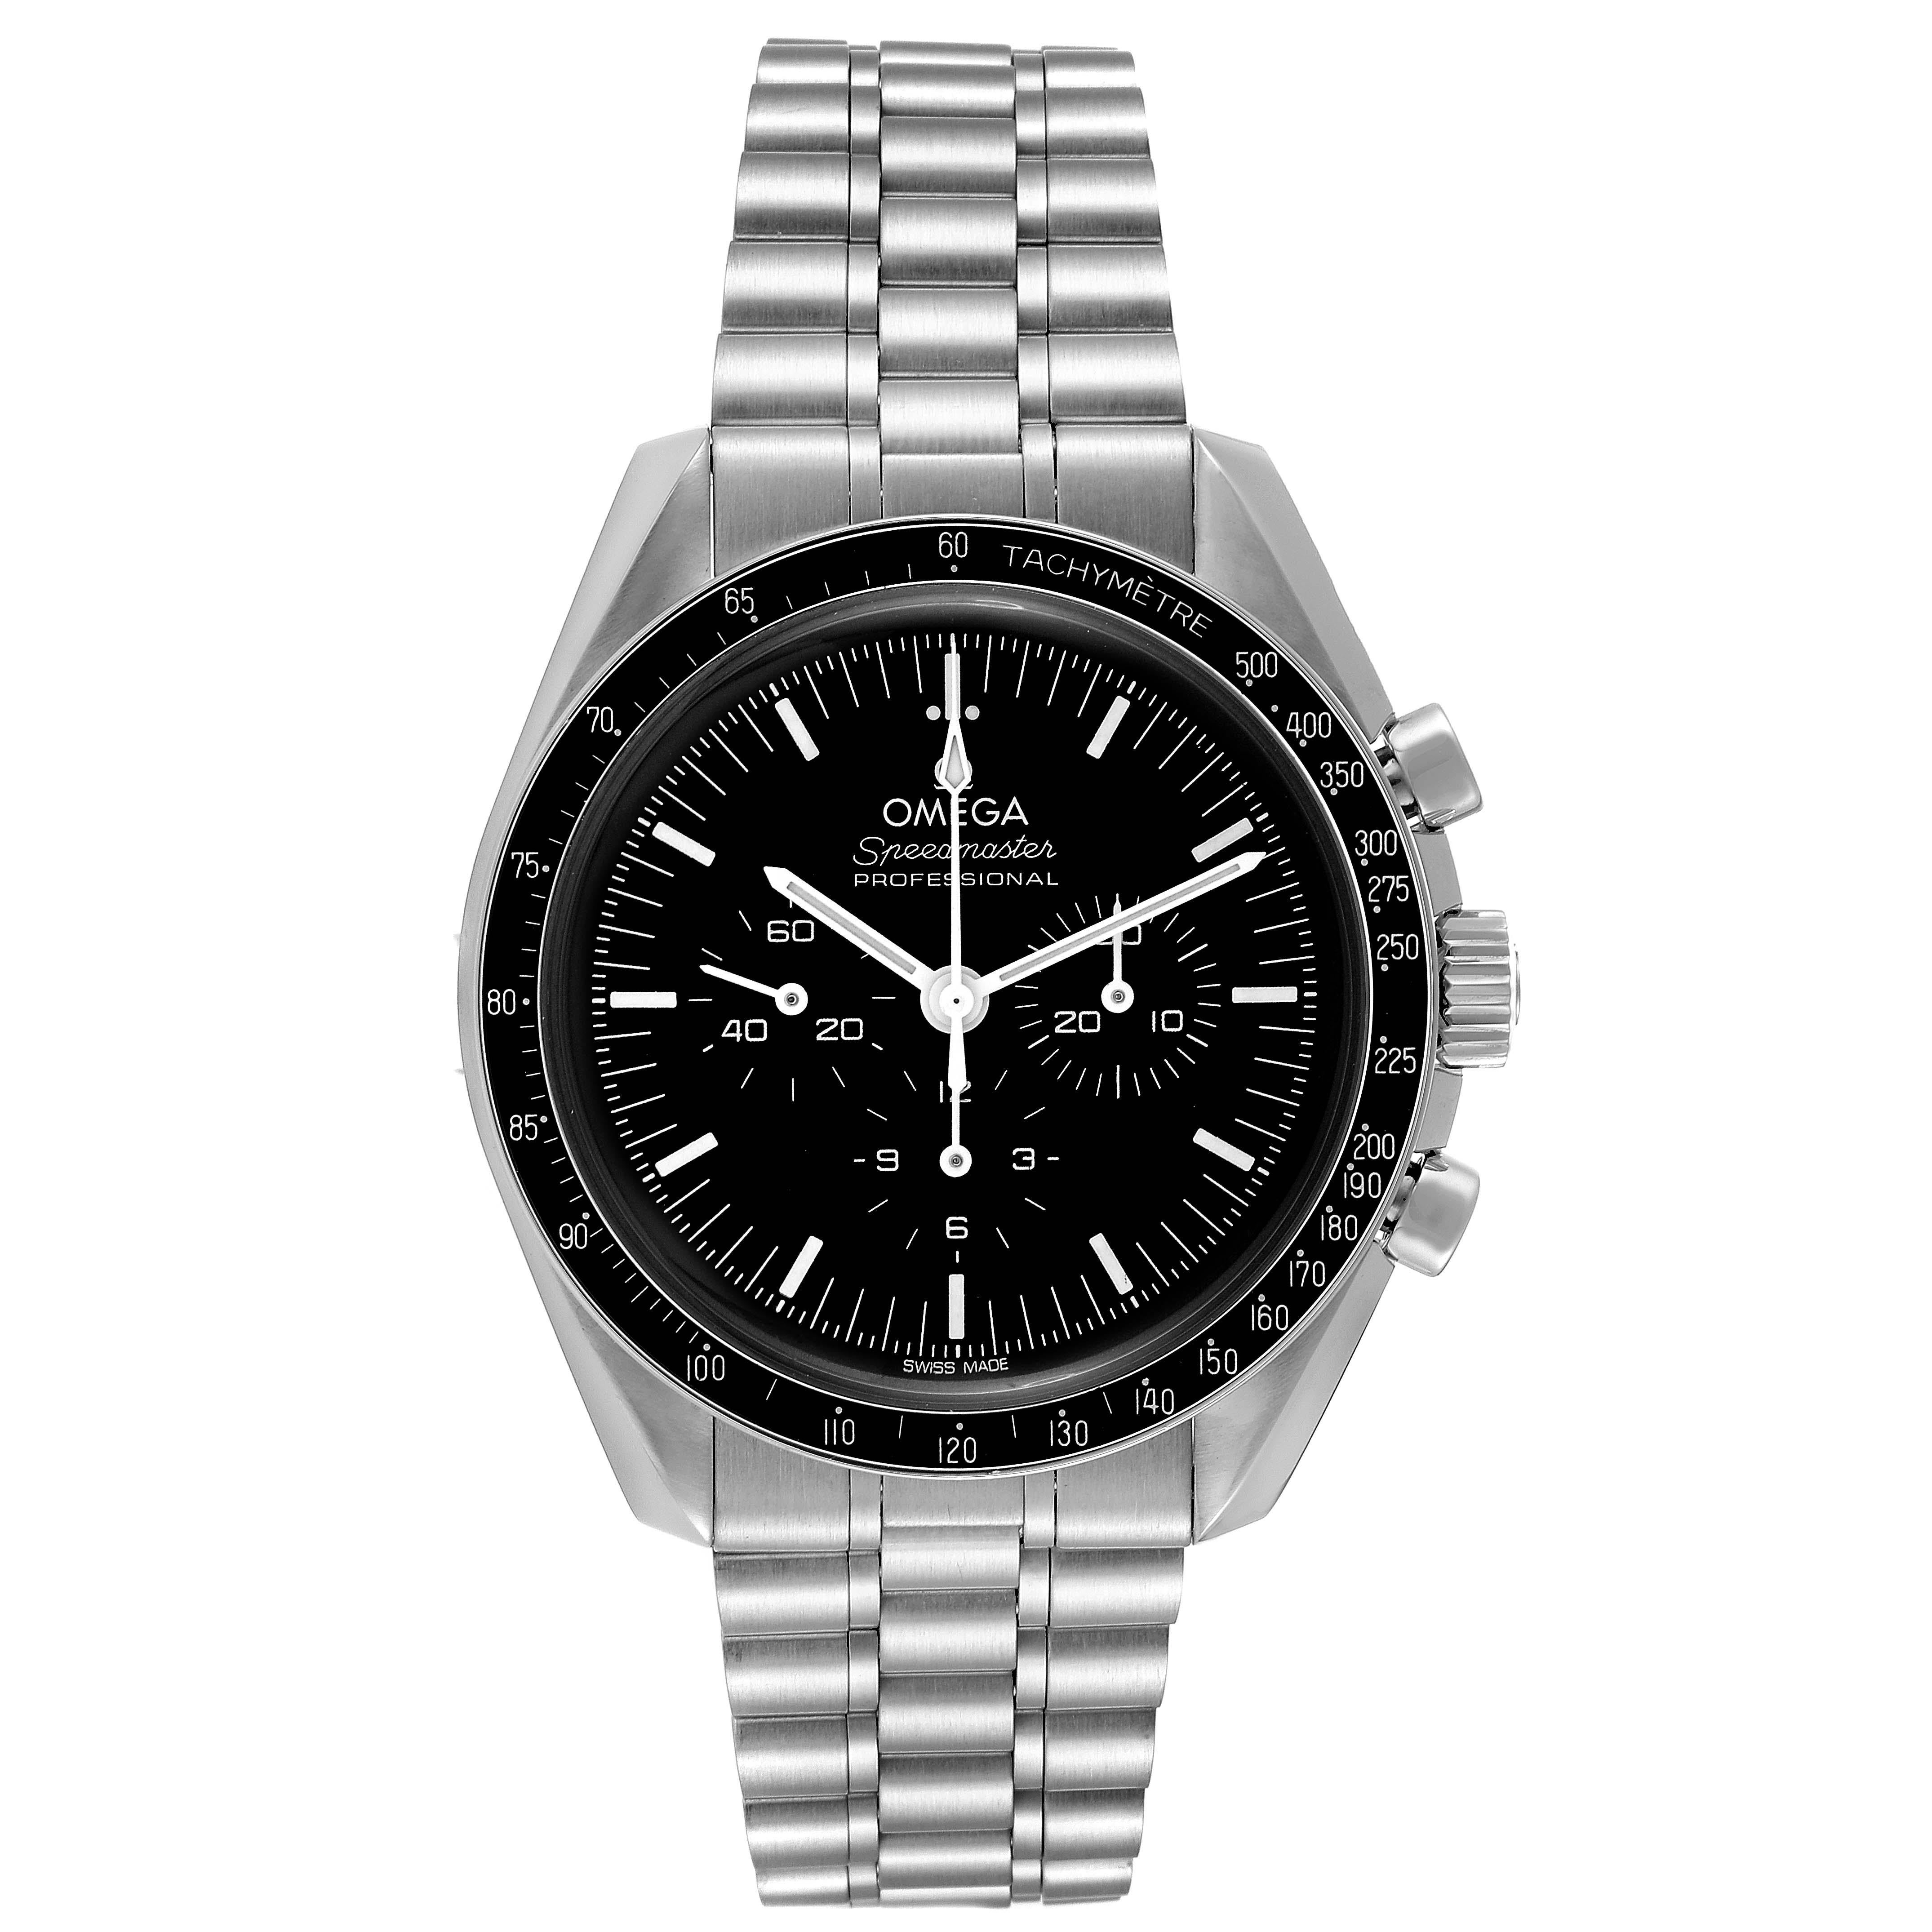 Omega Speedmaster Moonwatch Steel Mens Watch 310.30.42.50.01.001 Box Card. Manual winding chronograph movement. Stainless steel round case 42 mm in diameter. Omega logo on a crown. Stainless steel bezel with tachymetre function. Hesalite acrylic